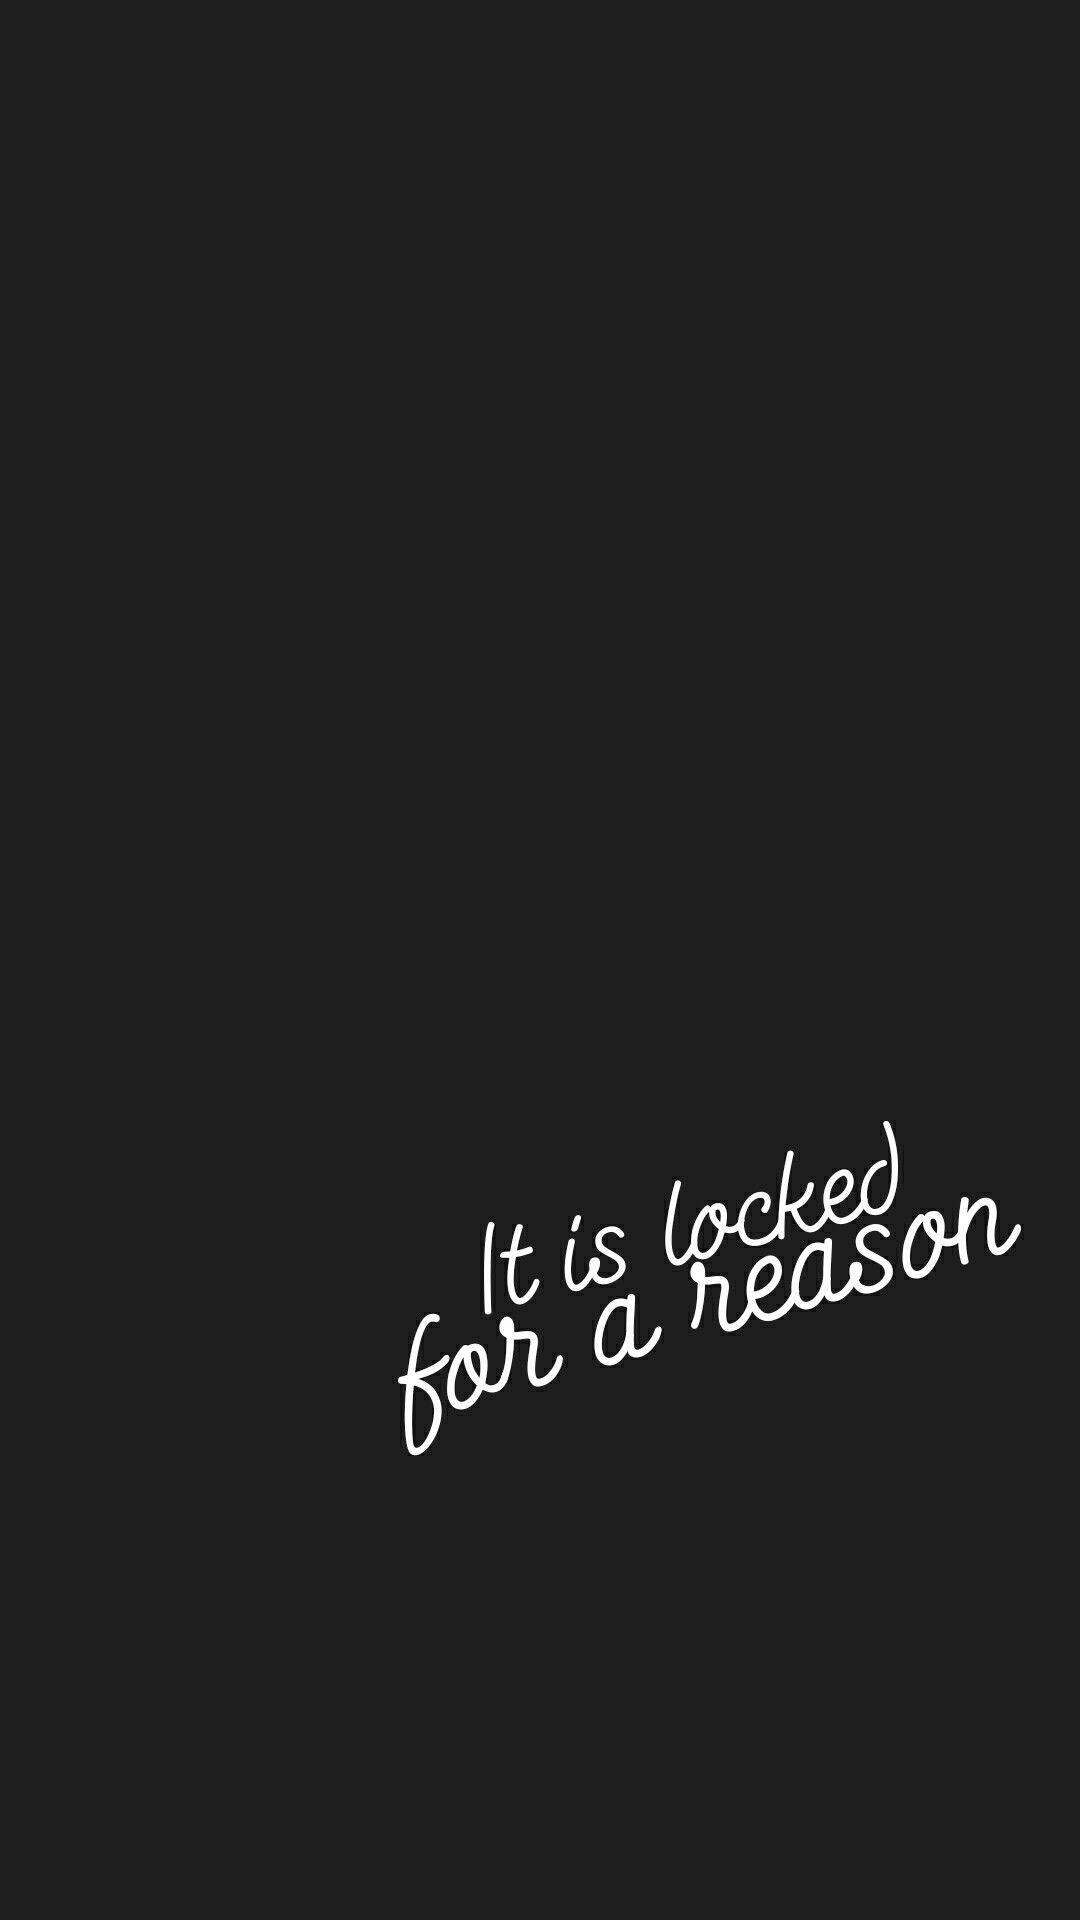 Locked for Reason to see more locked phone wallpaper